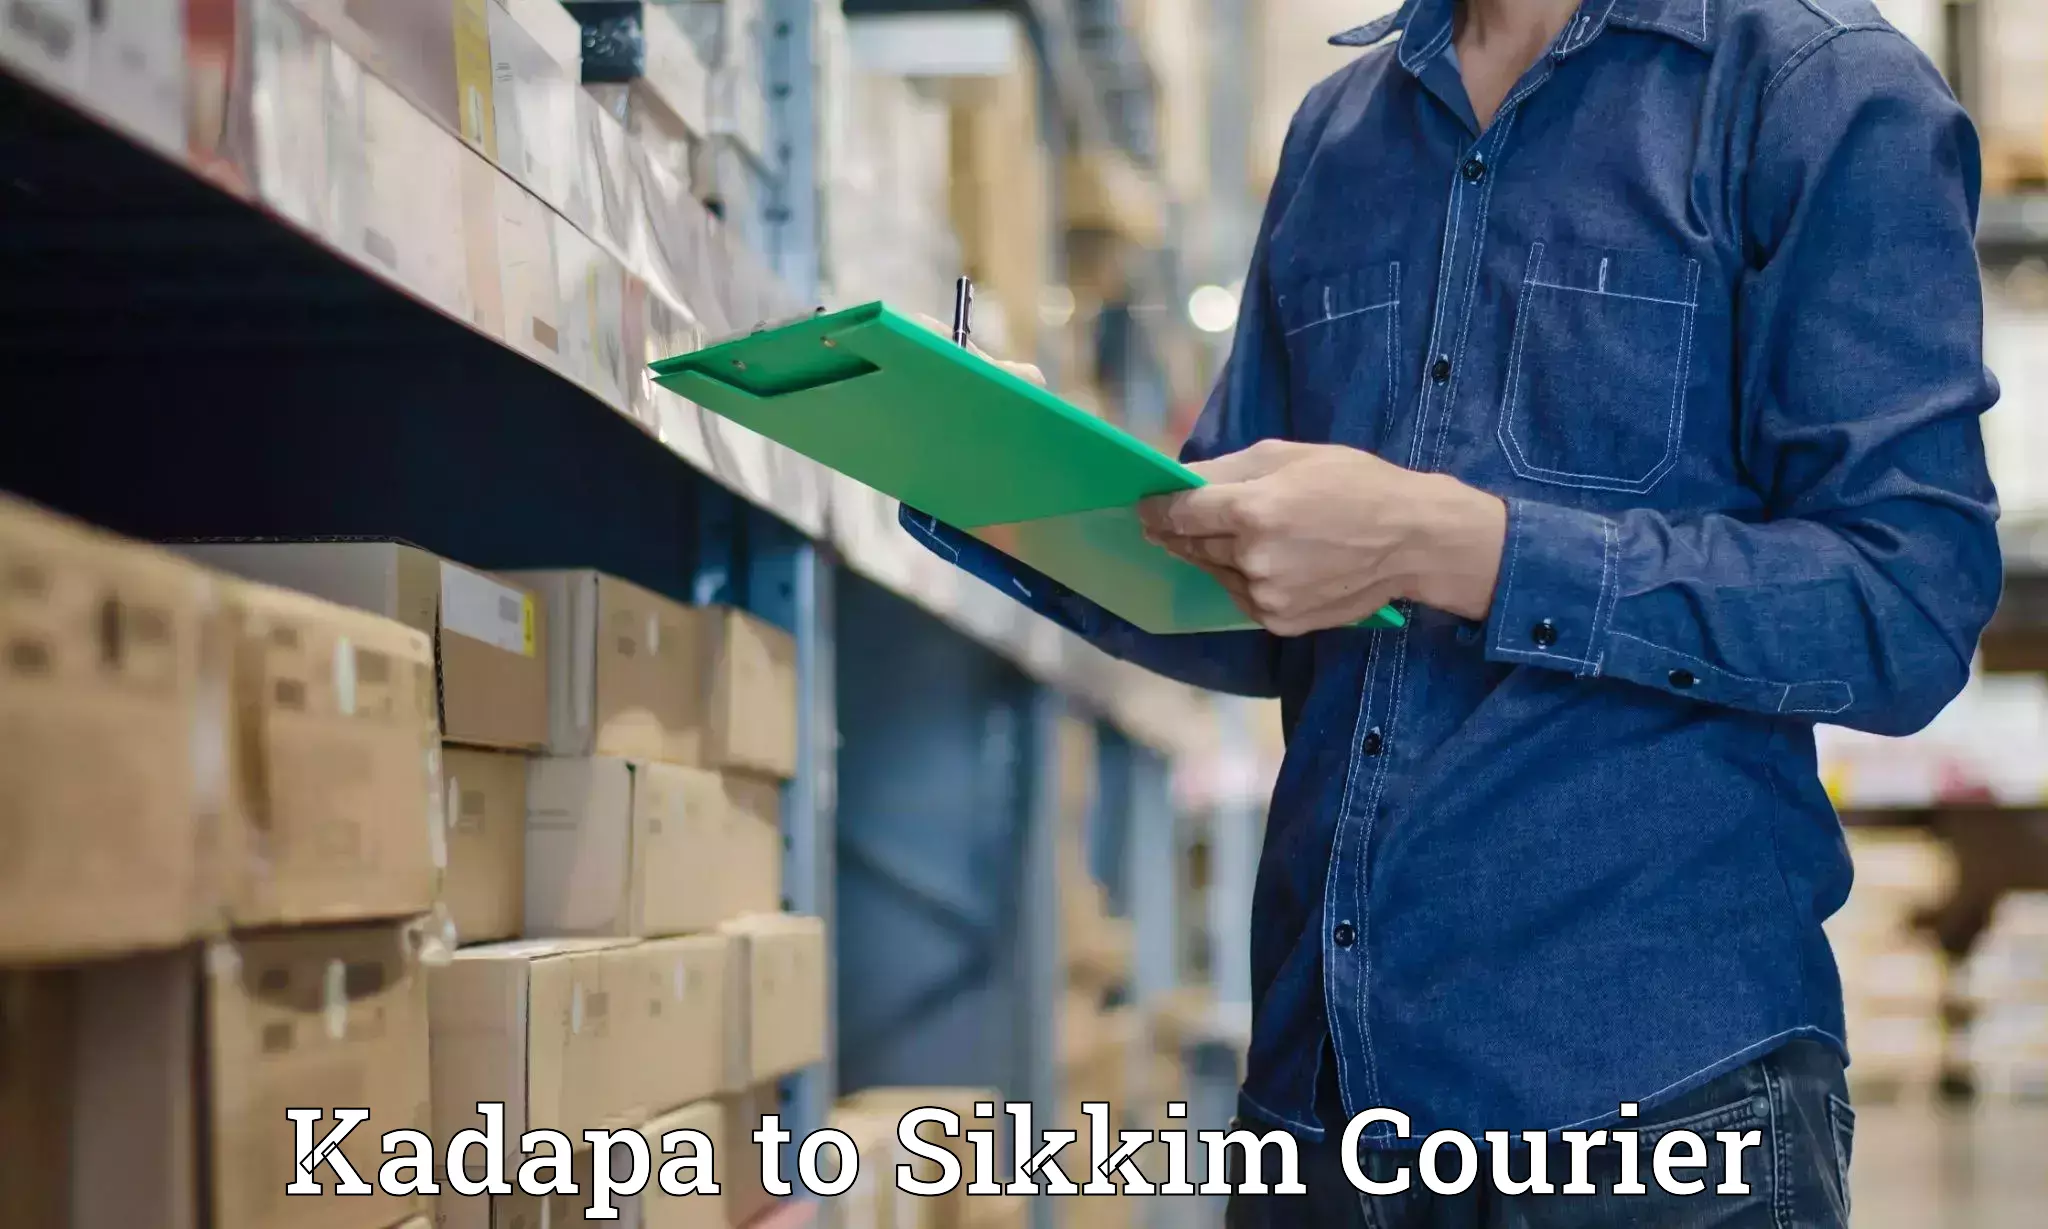 Local delivery service Kadapa to West Sikkim